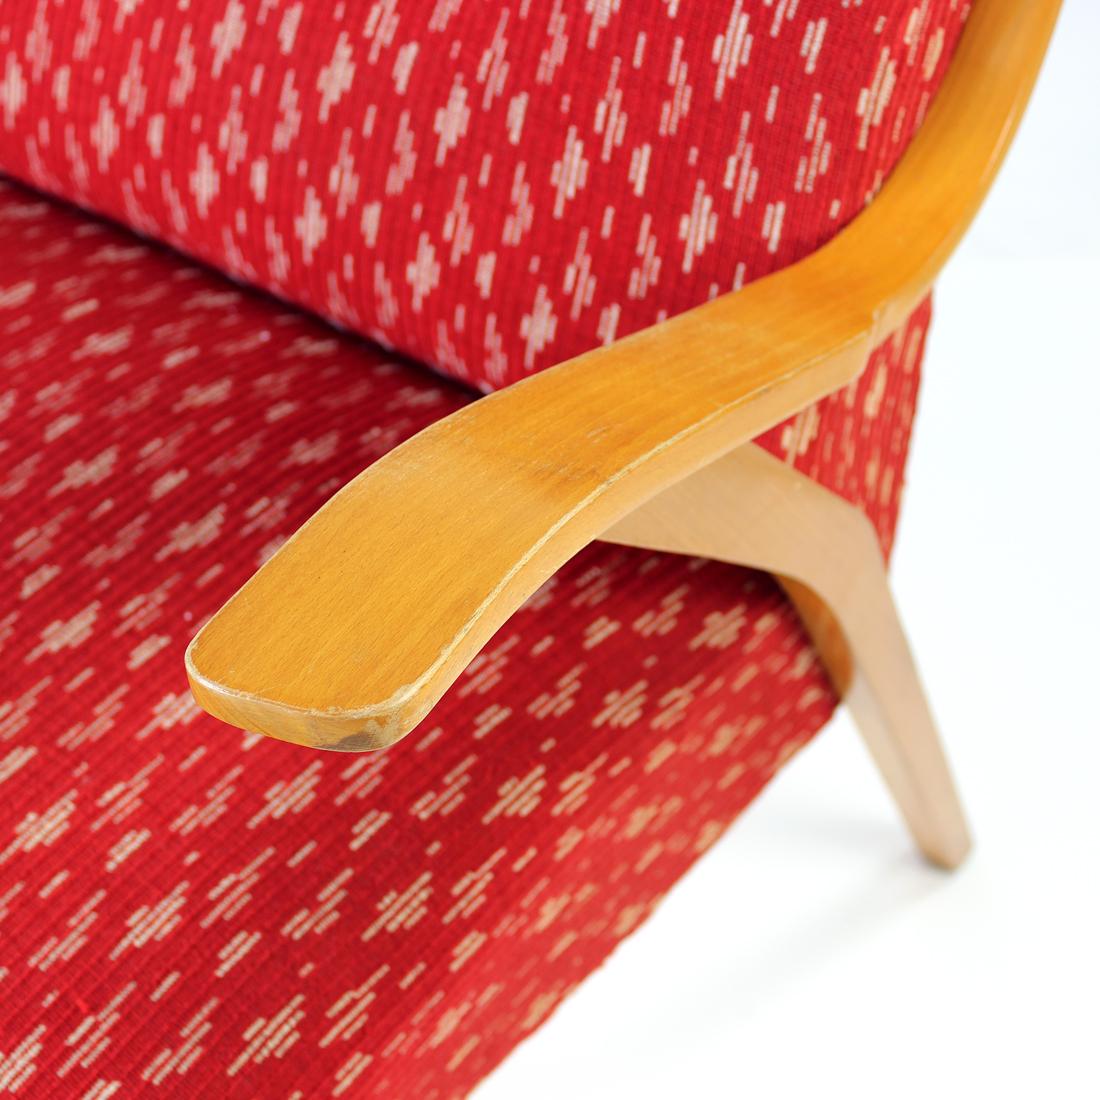 Midcentury Armchair in Original Red Fabric & Blonde Wood, Czechoslovakia, 1960s For Sale 5